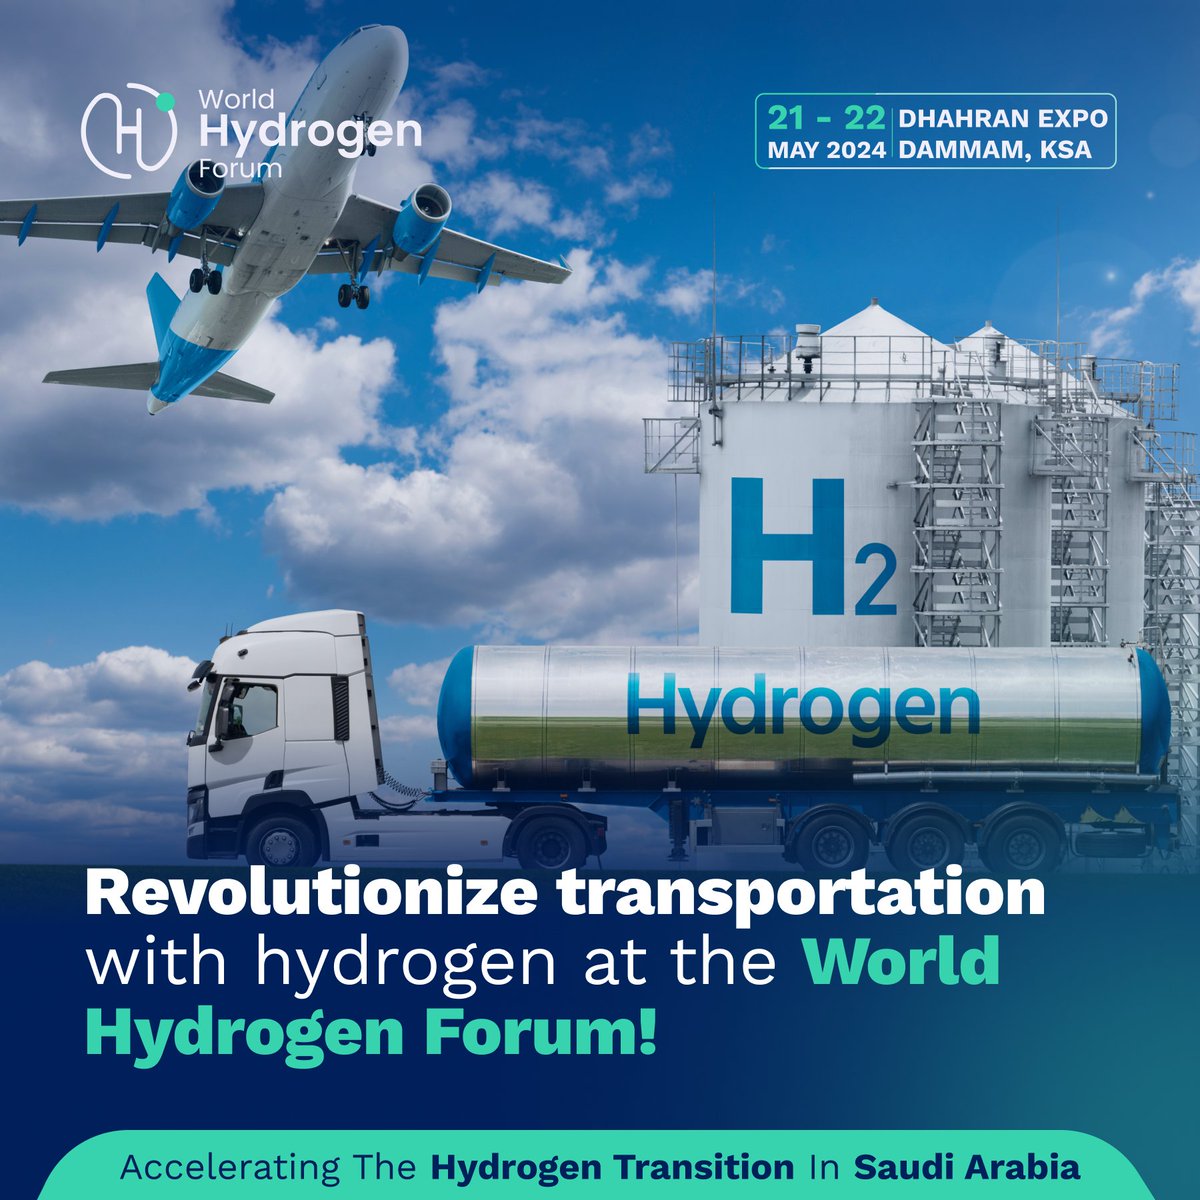 Revolutionize transportation with hydrogen at the World Hydrogen Forum! Explore the future of fuel cell vehicles and infrastructure.

Register today at tinyurl.com/4mwayx9n

#whf #worldhydrogenforum #hydrogen #dhahranexpo #saudiarabia #dammam #hydrogenenergy #hydrogeneconomy